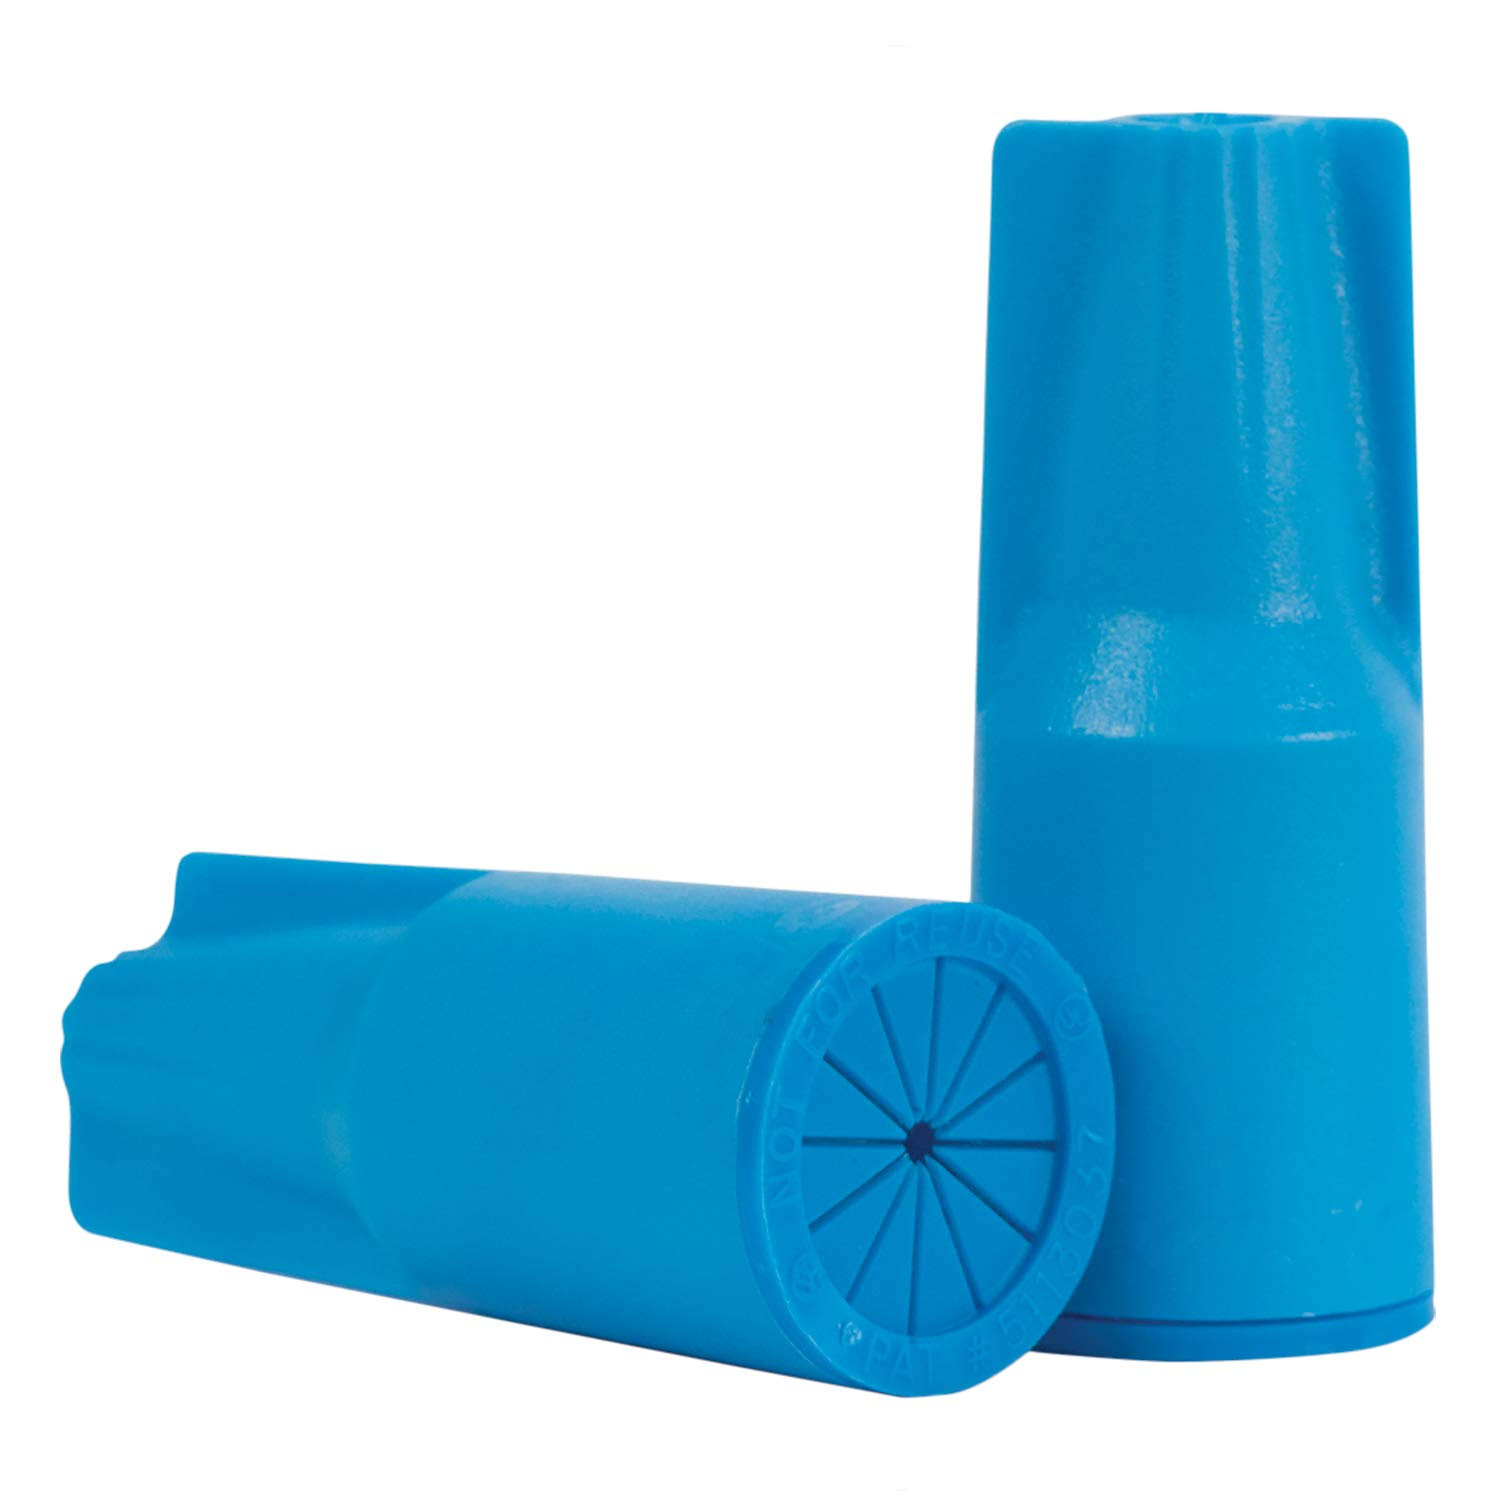 King Innovation Waterproof Wire Connectors - Blue, 2"x13/16"